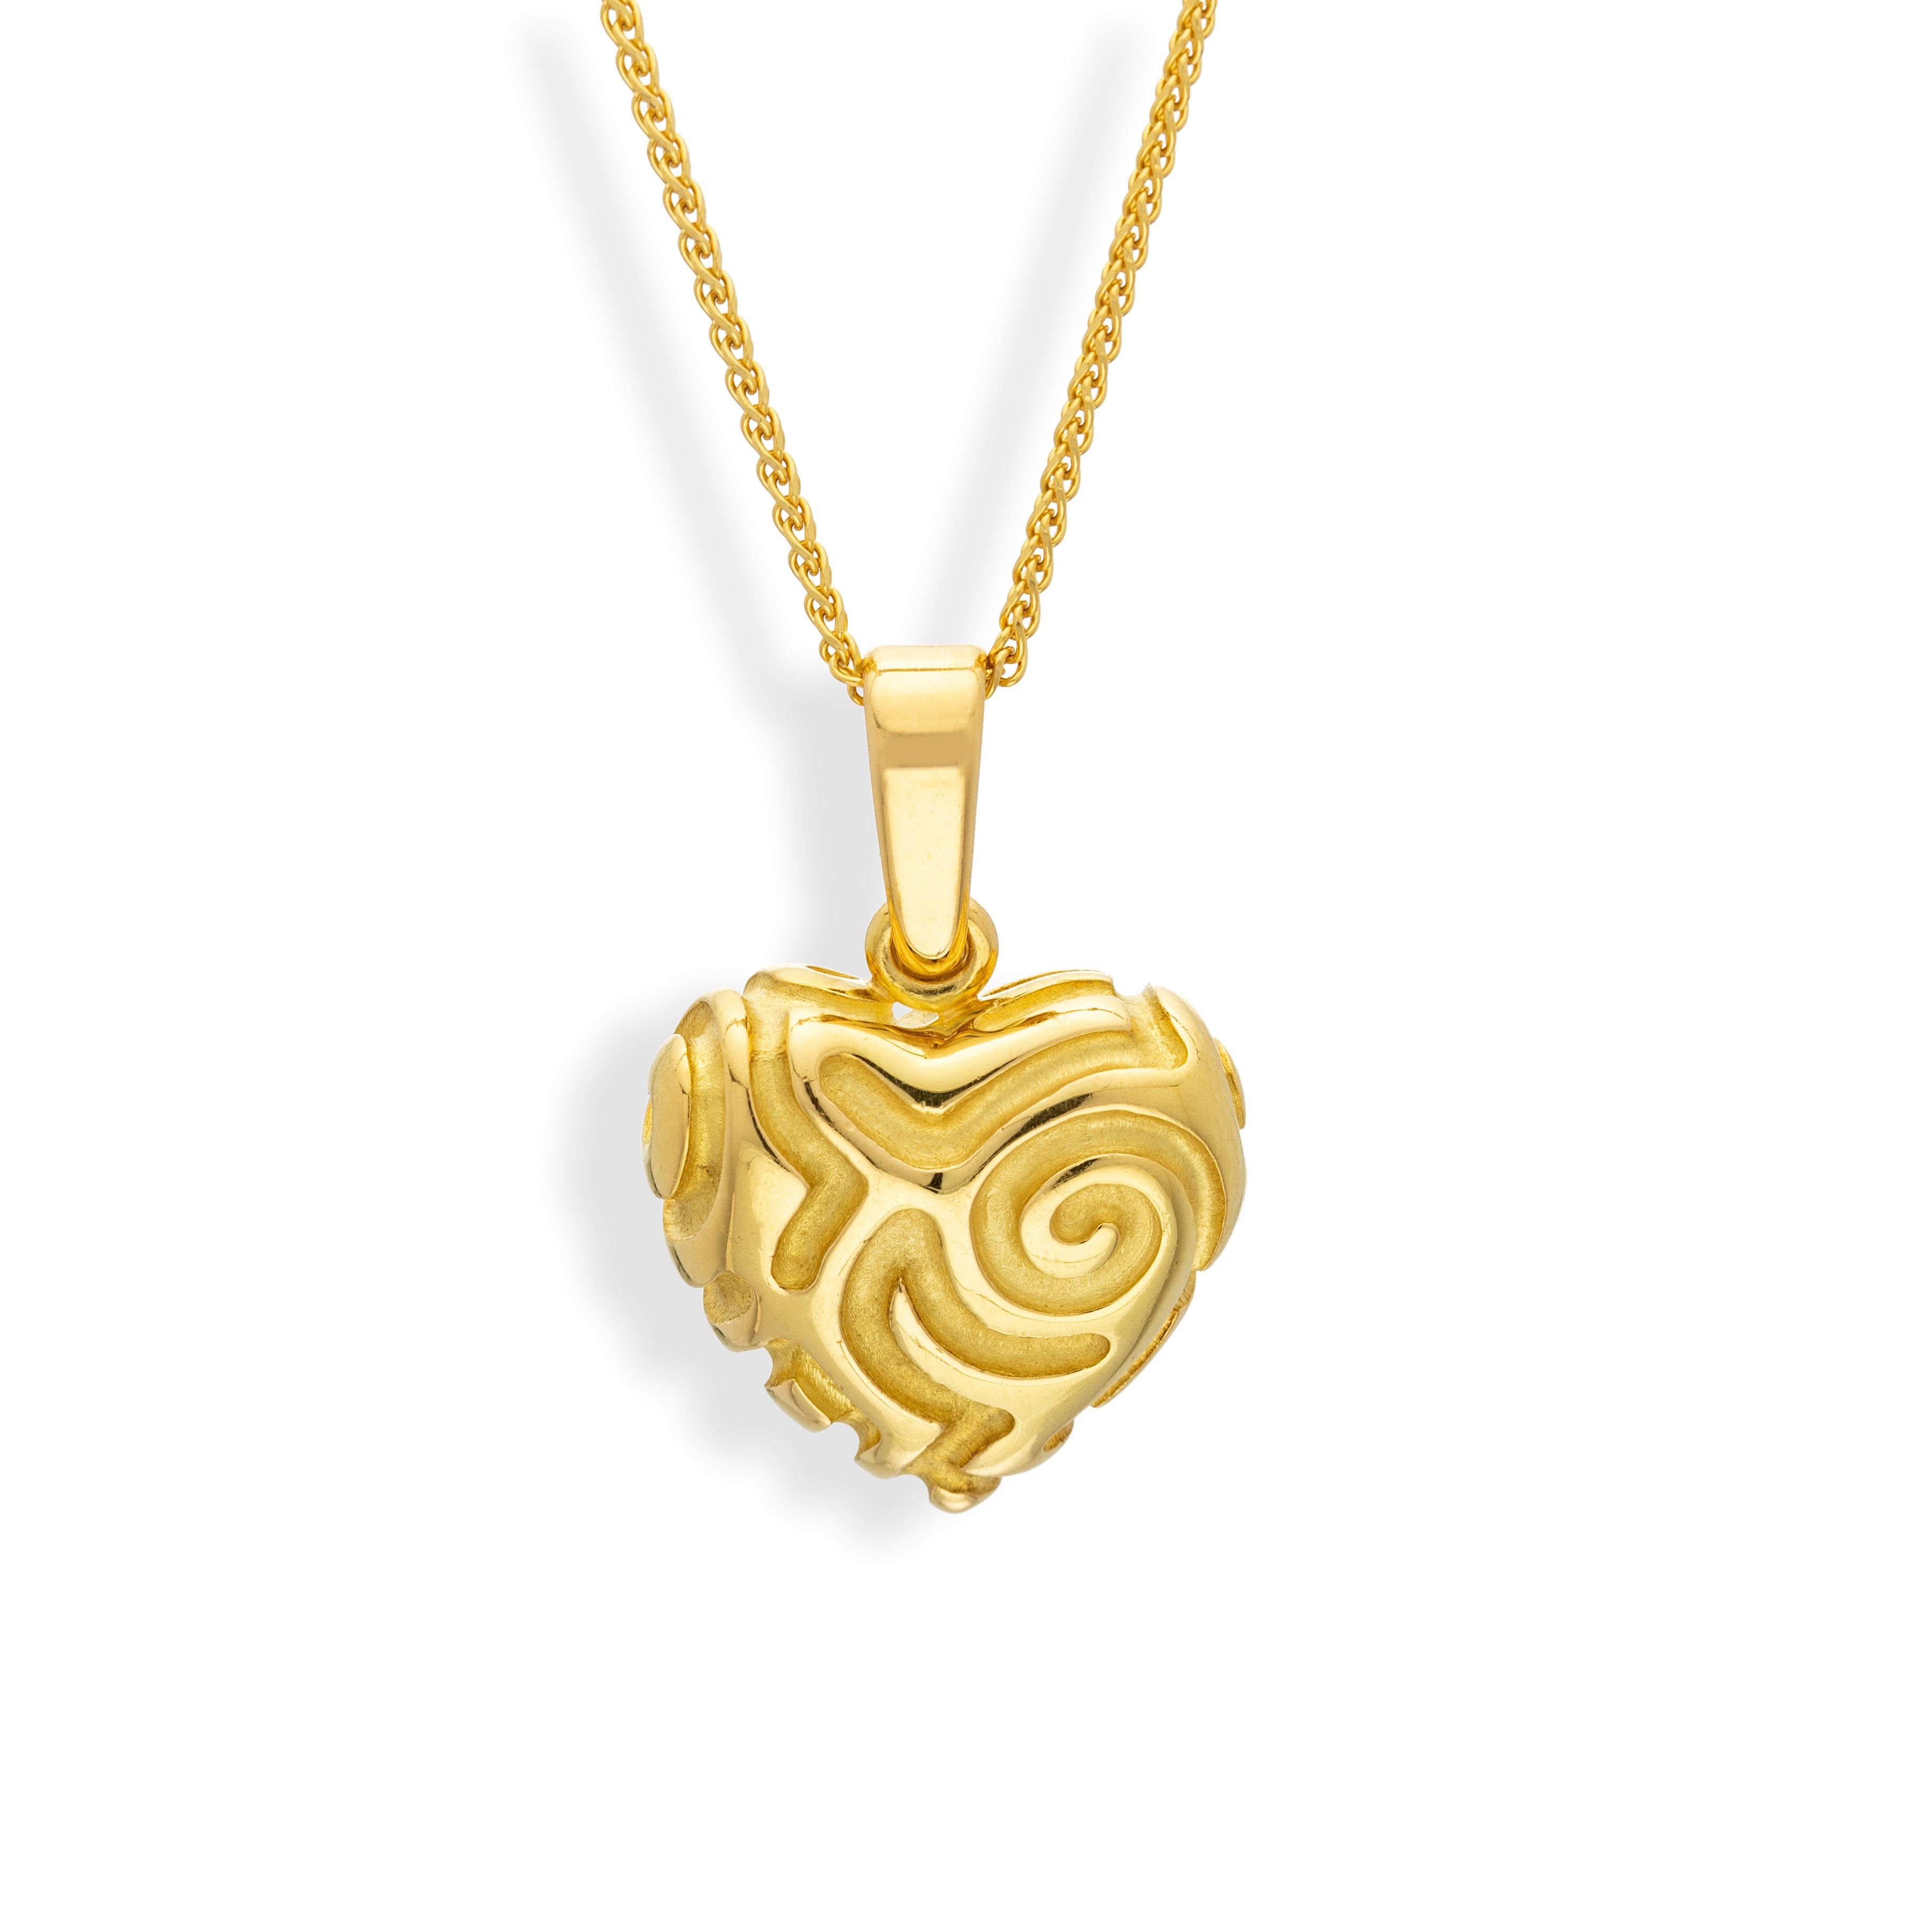 This hand carved heart shaped pendant in 18k yellow gold is a perfect expression of love - either by giving it to that special someone as a gift, or by wearing it as an affirmation of love. In any event, it is casual enough to be worn every day ,